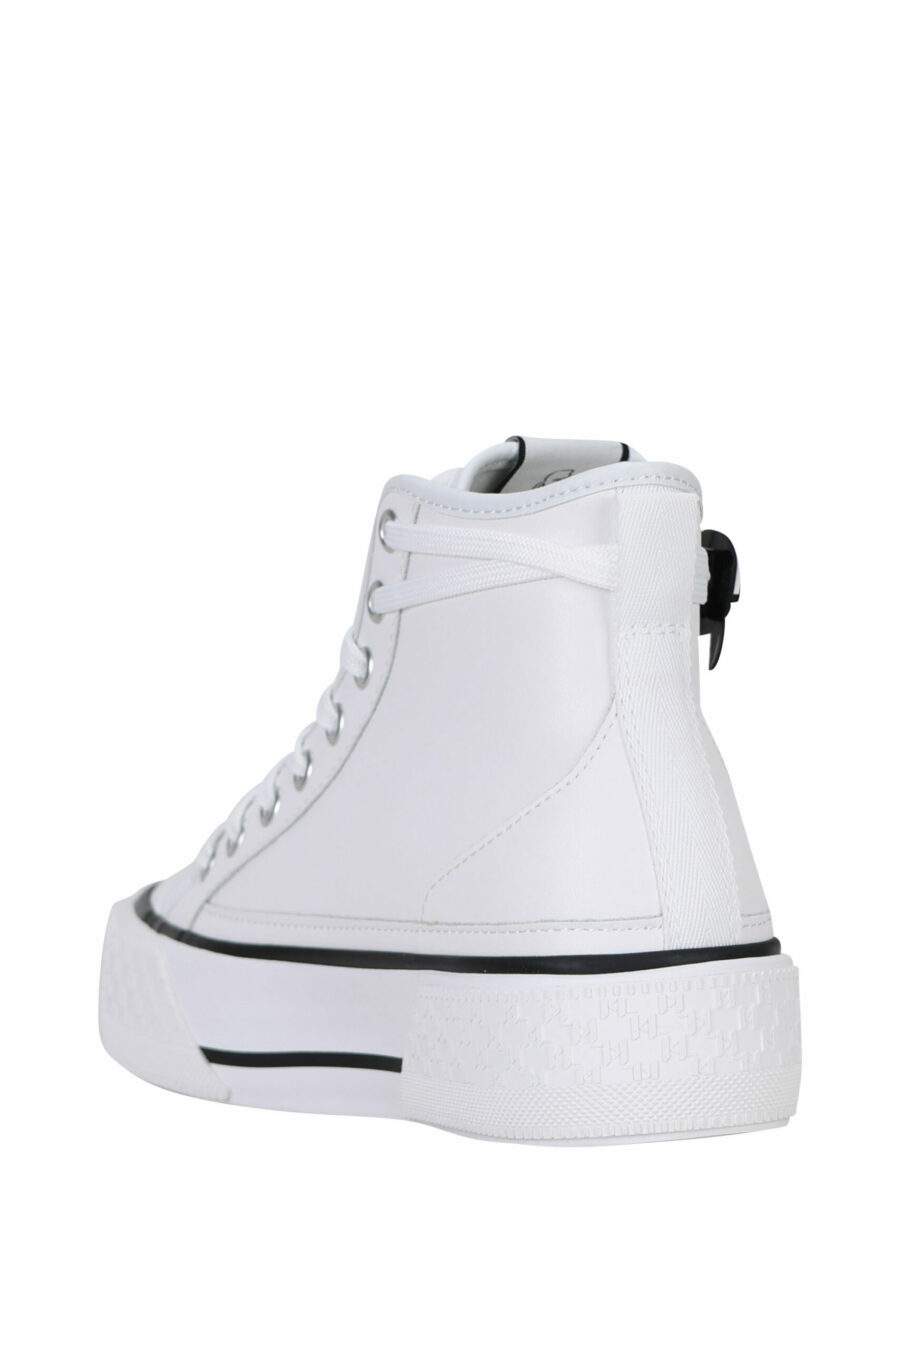 White leather high top trainers with white sole and "karl" logo - 5059529322974 3 scaled